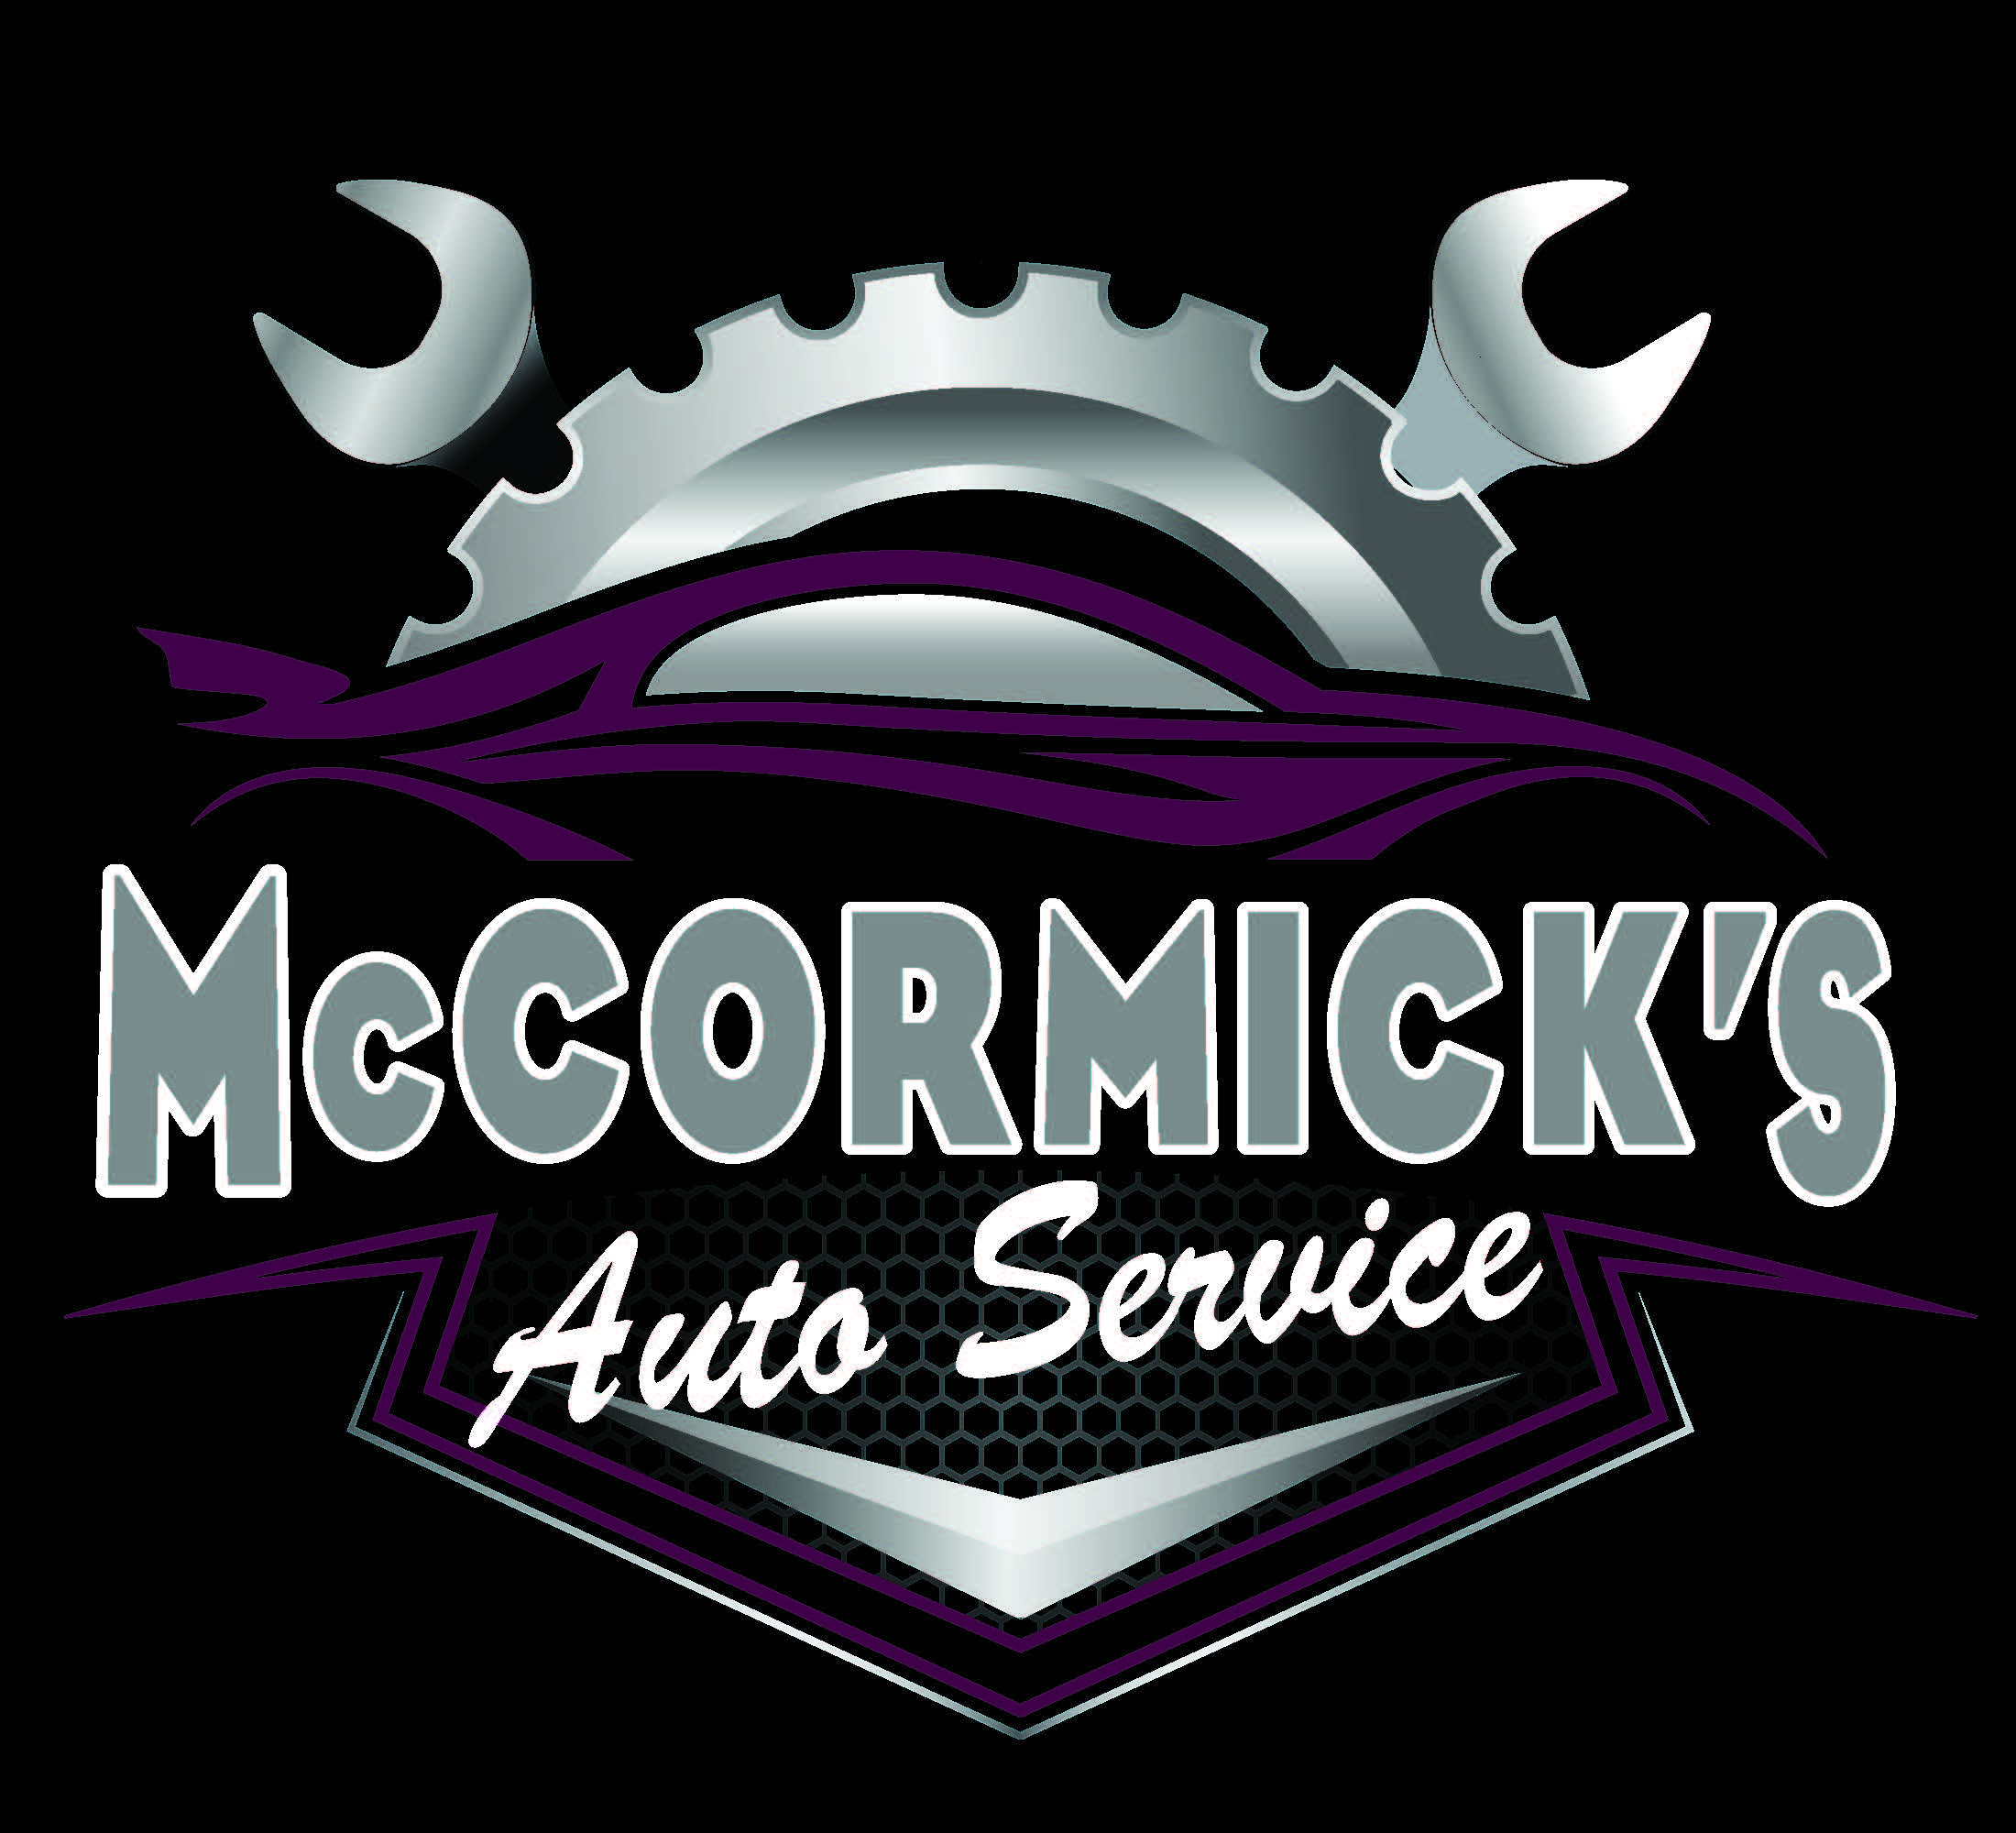 $12.50 gets you $25 to spend at McCormick's Auto Service